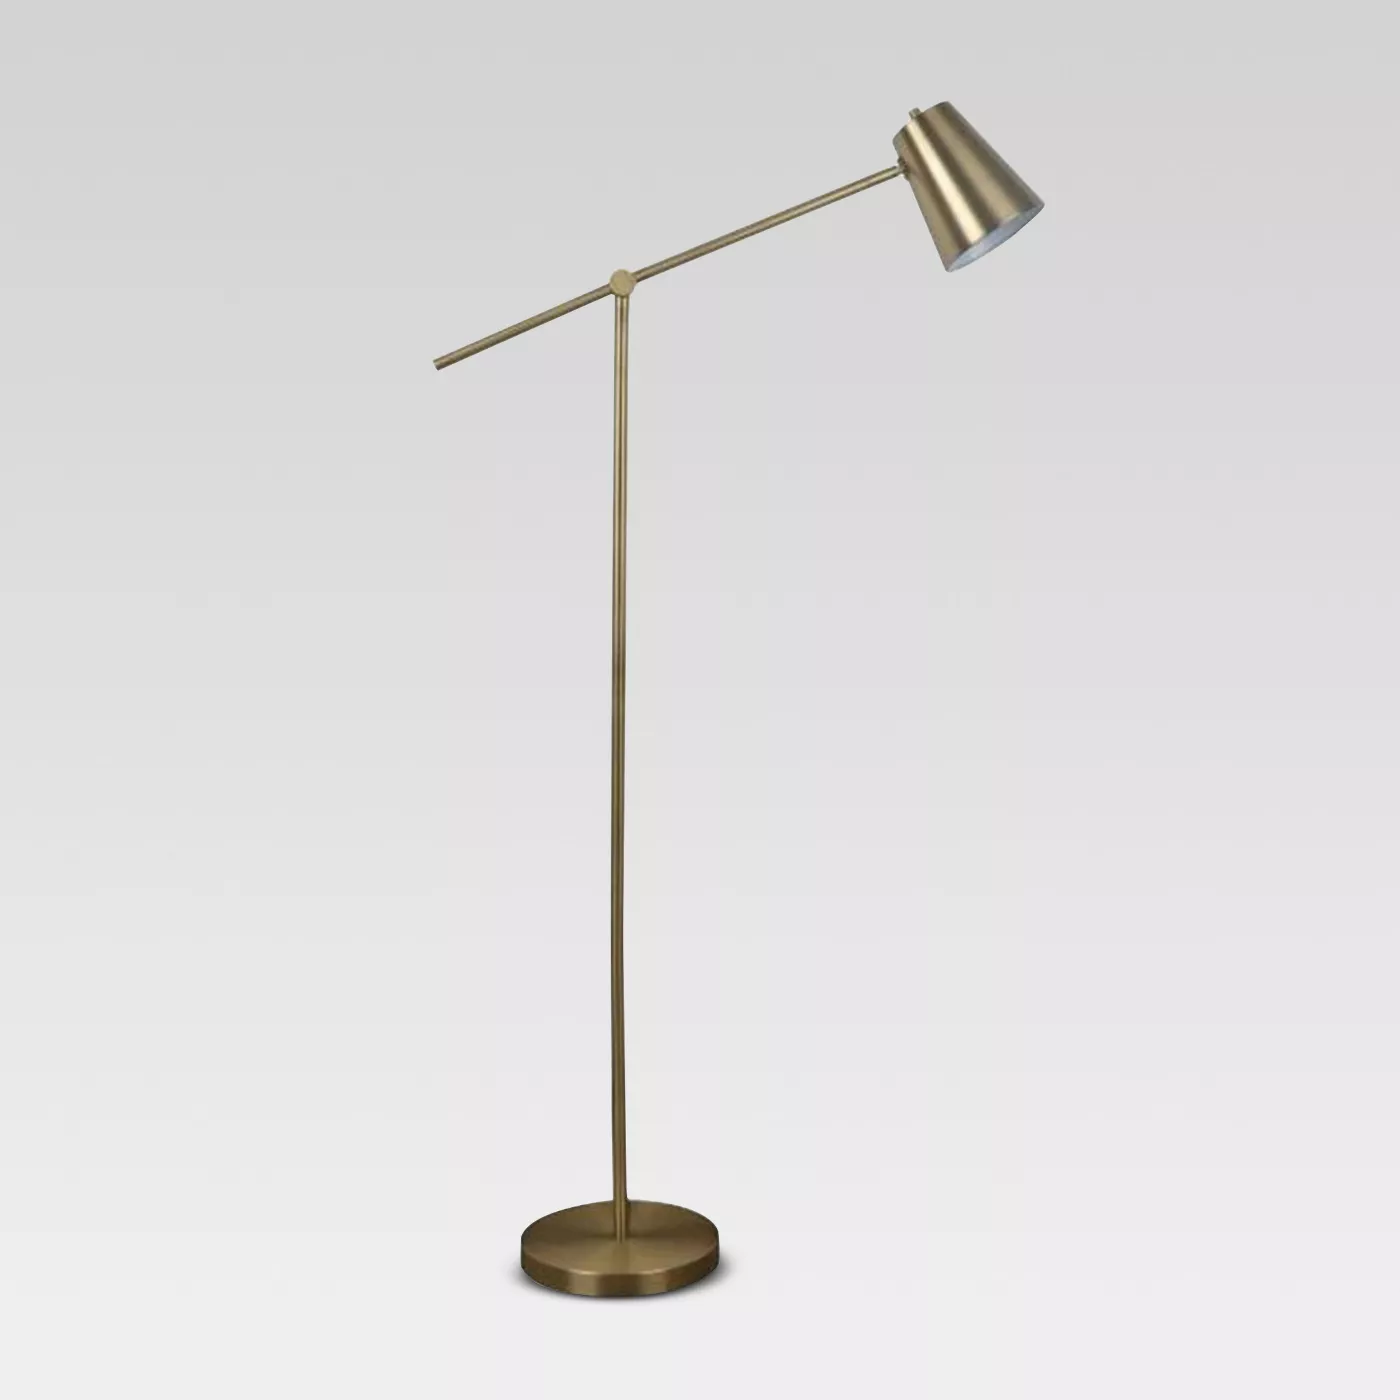 Shop Cantilever Floor Lamp Brass - Project 62 from Target on Openhaus